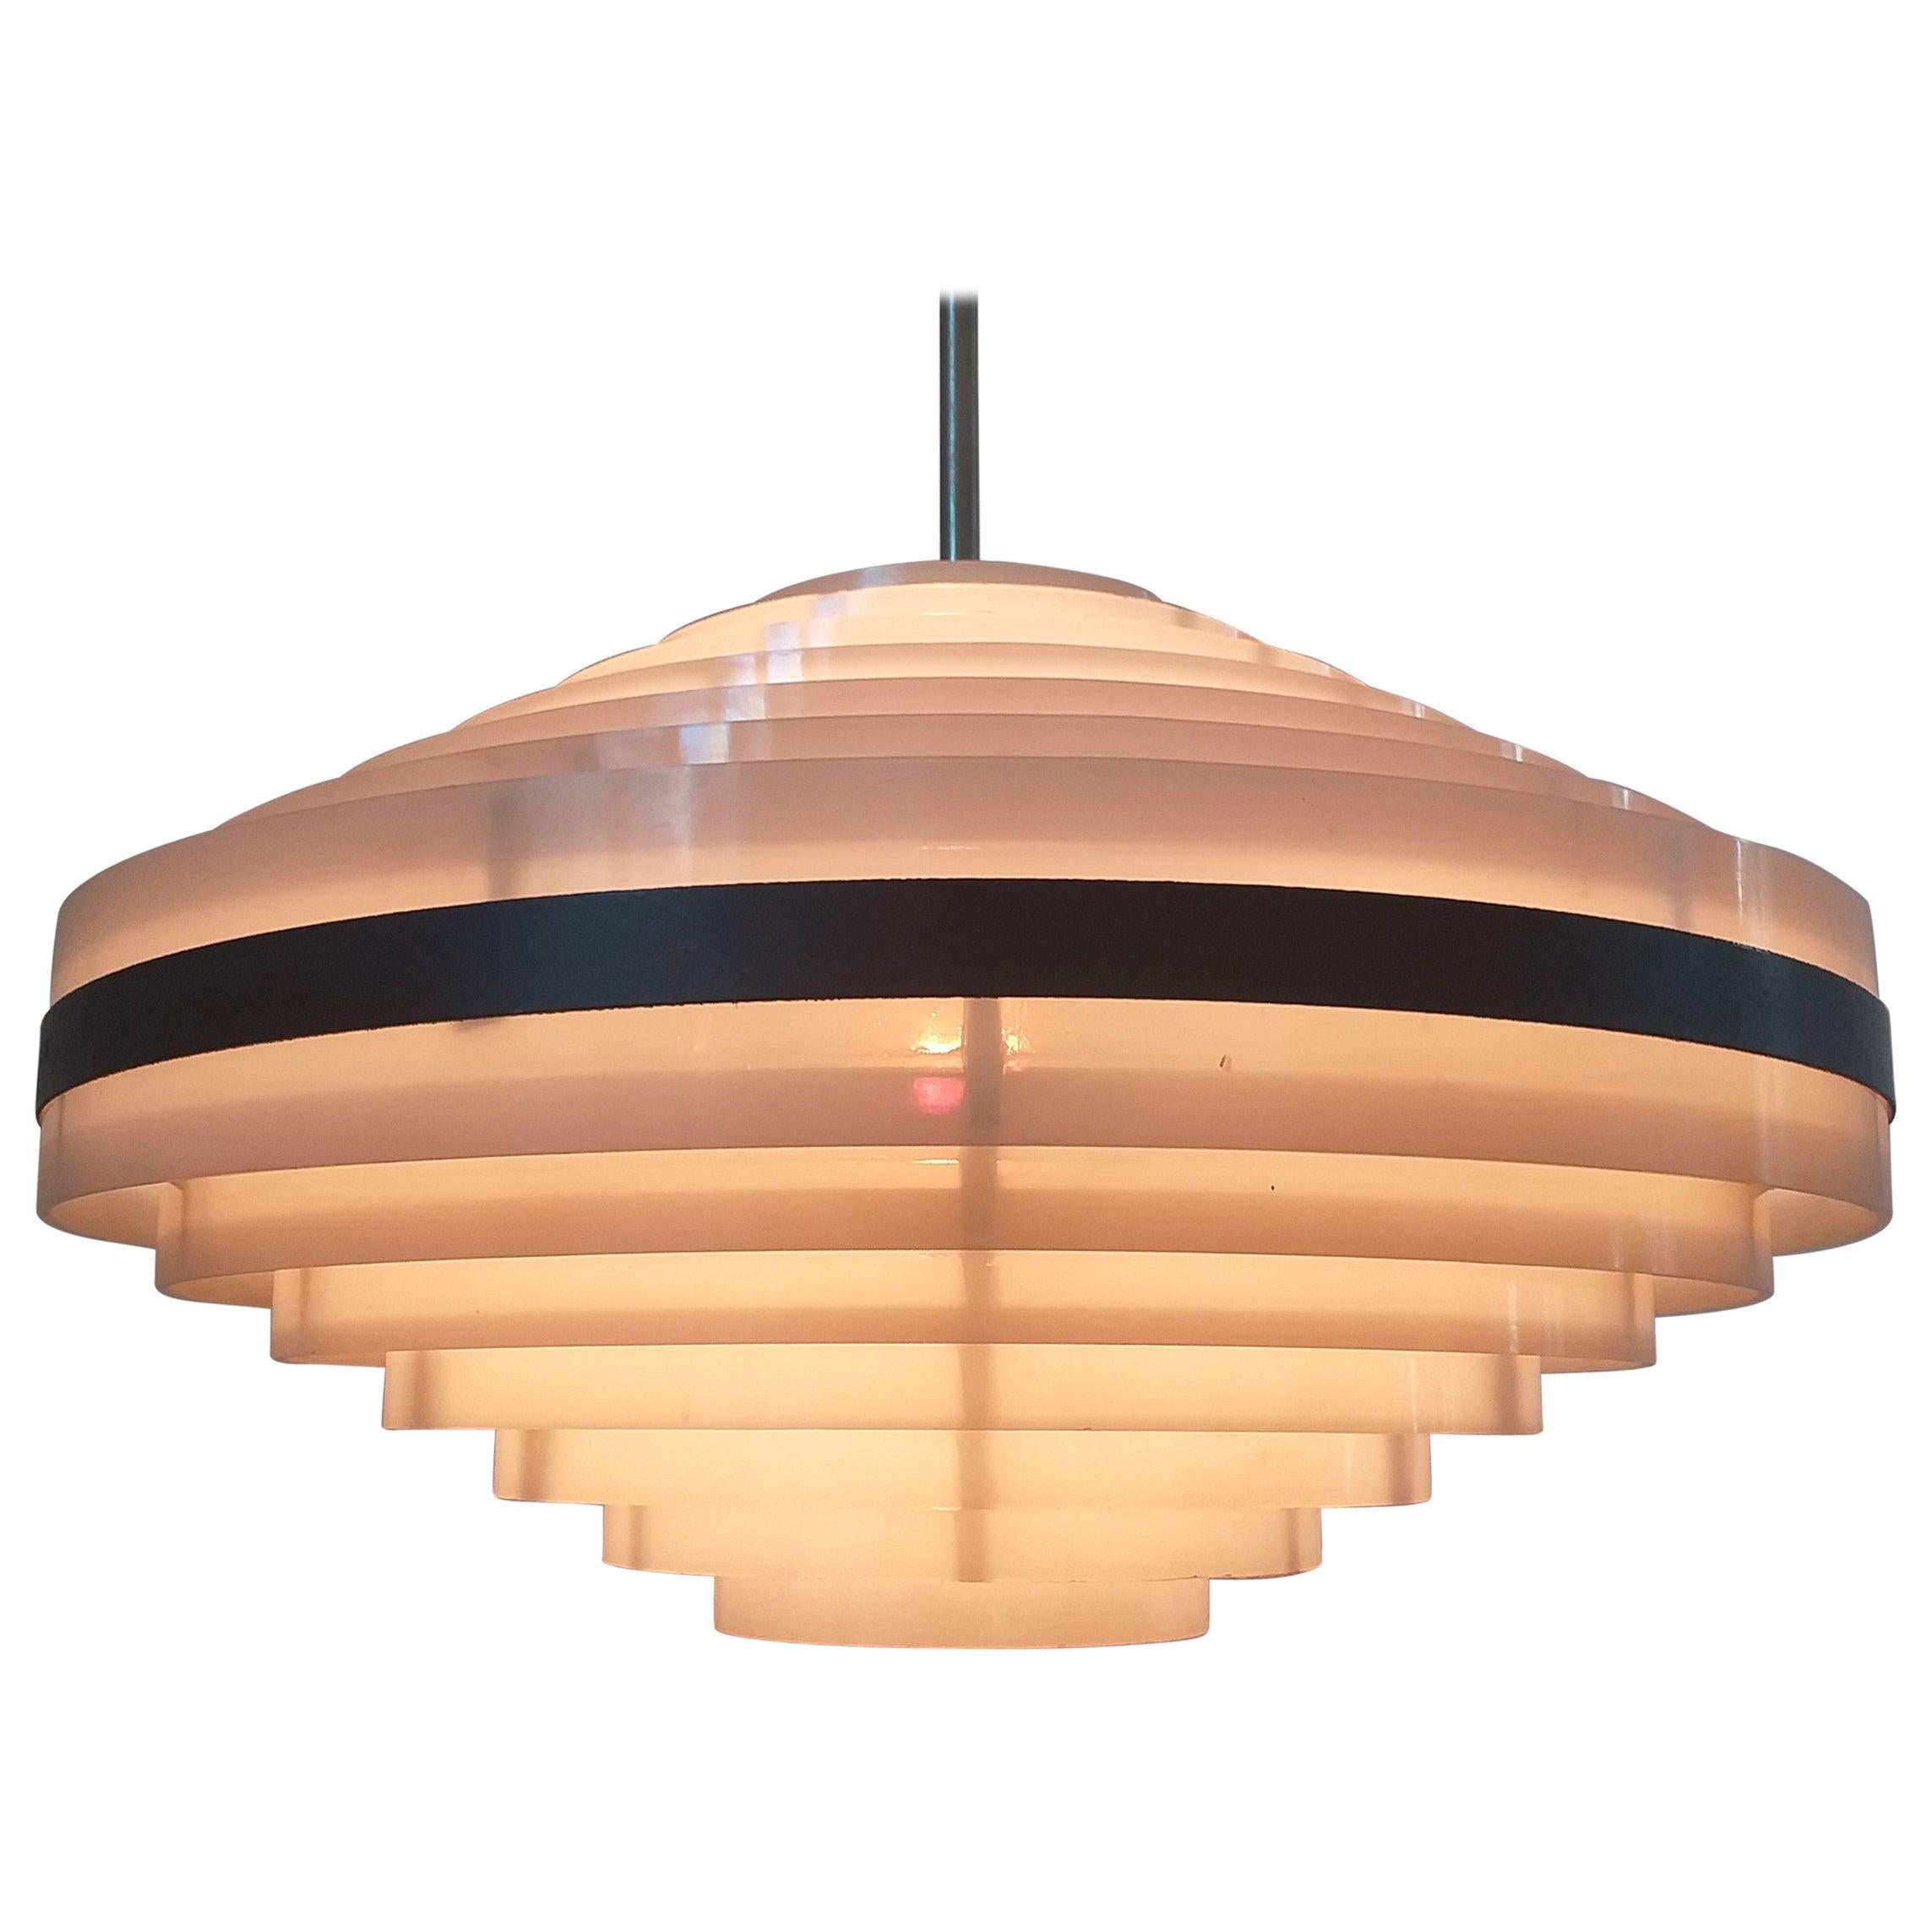 Midcentury Space Age UFO Style Pendant, 1970s / Up to 14 Pieces For Sale